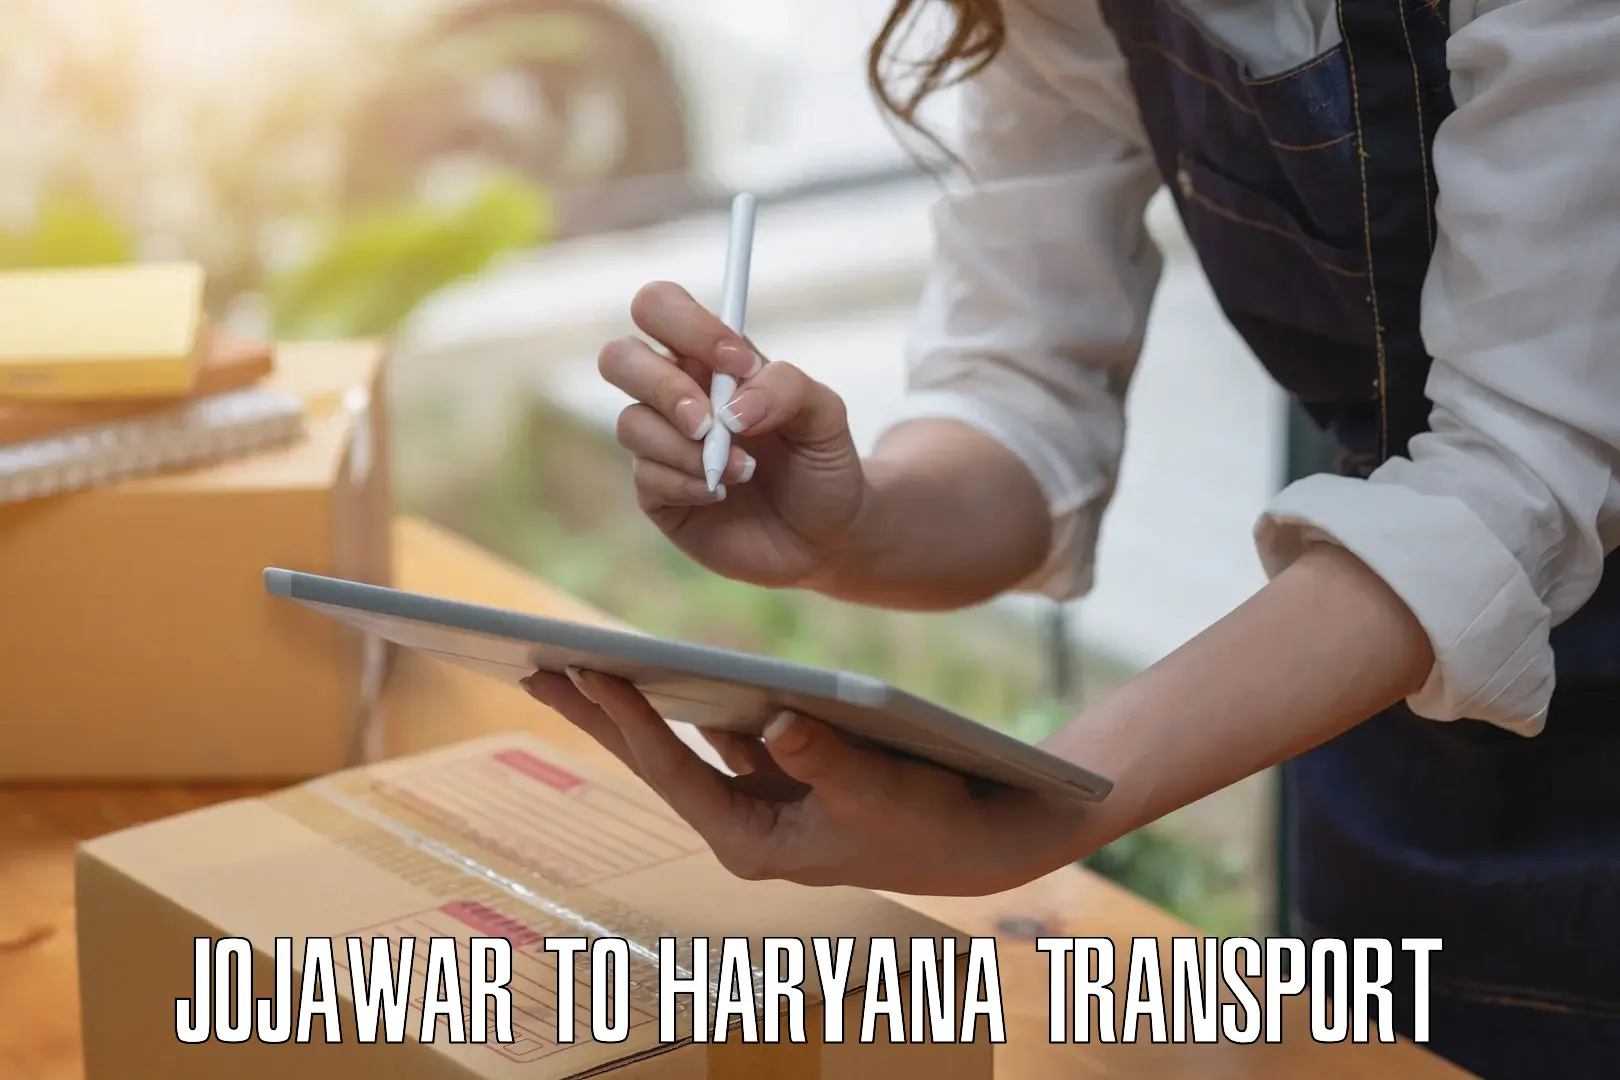 Transport shared services in Jojawar to Rohtak